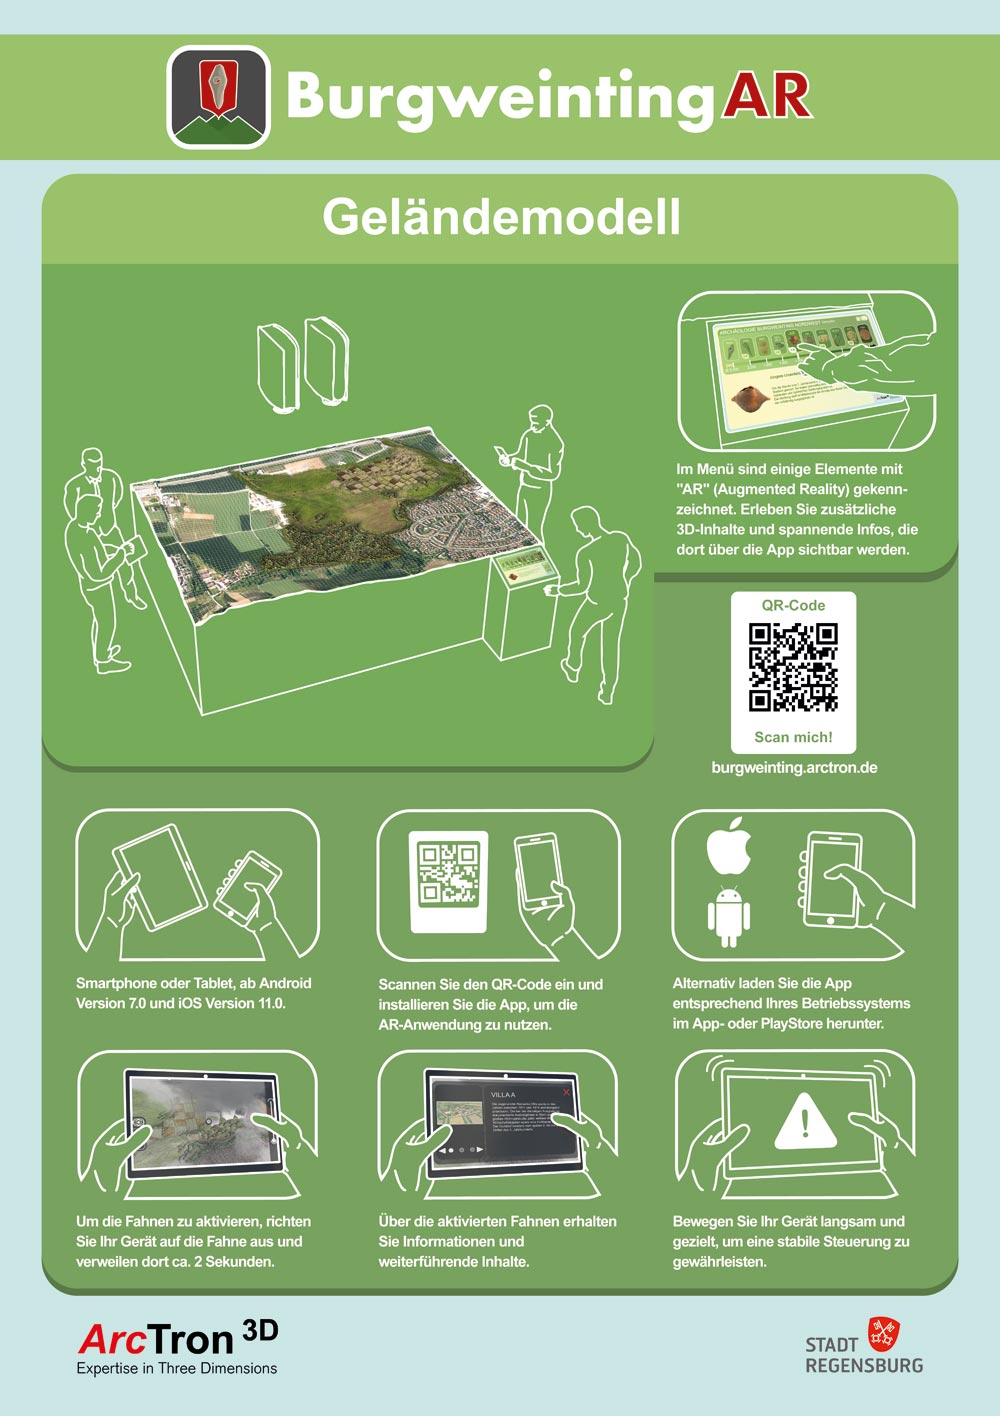 Poster explaining the AR application on your own device for the terrain model.